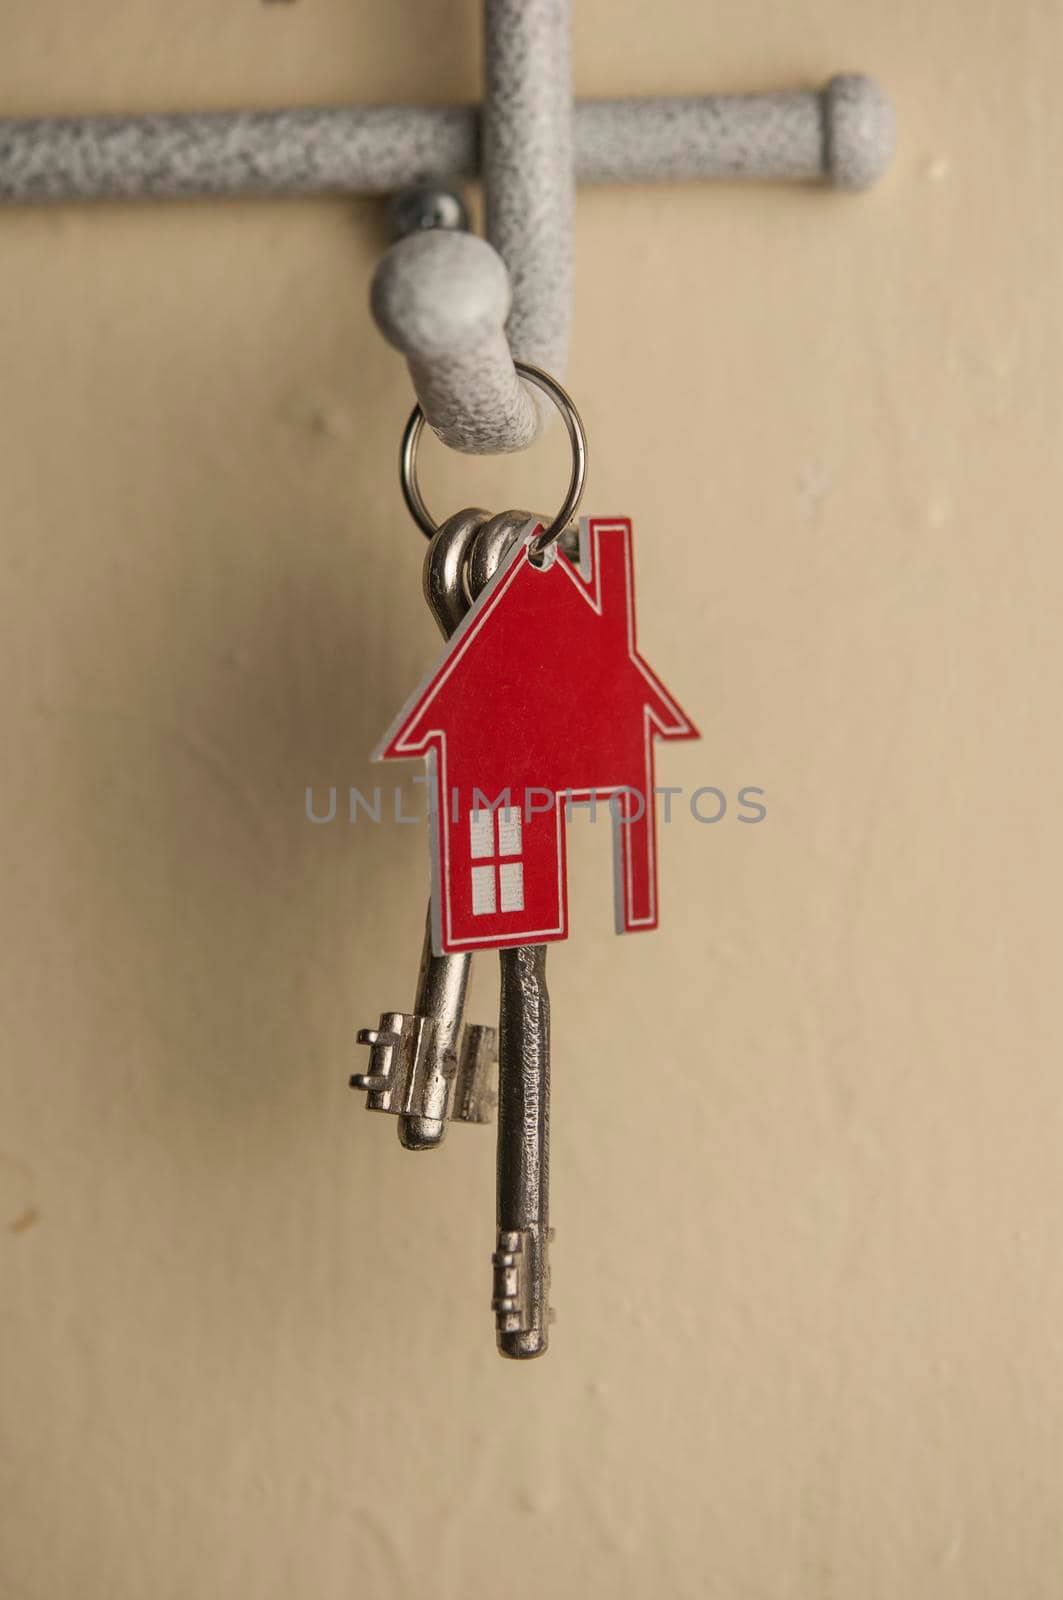 Key holder with keys hanging on the wall by inxti